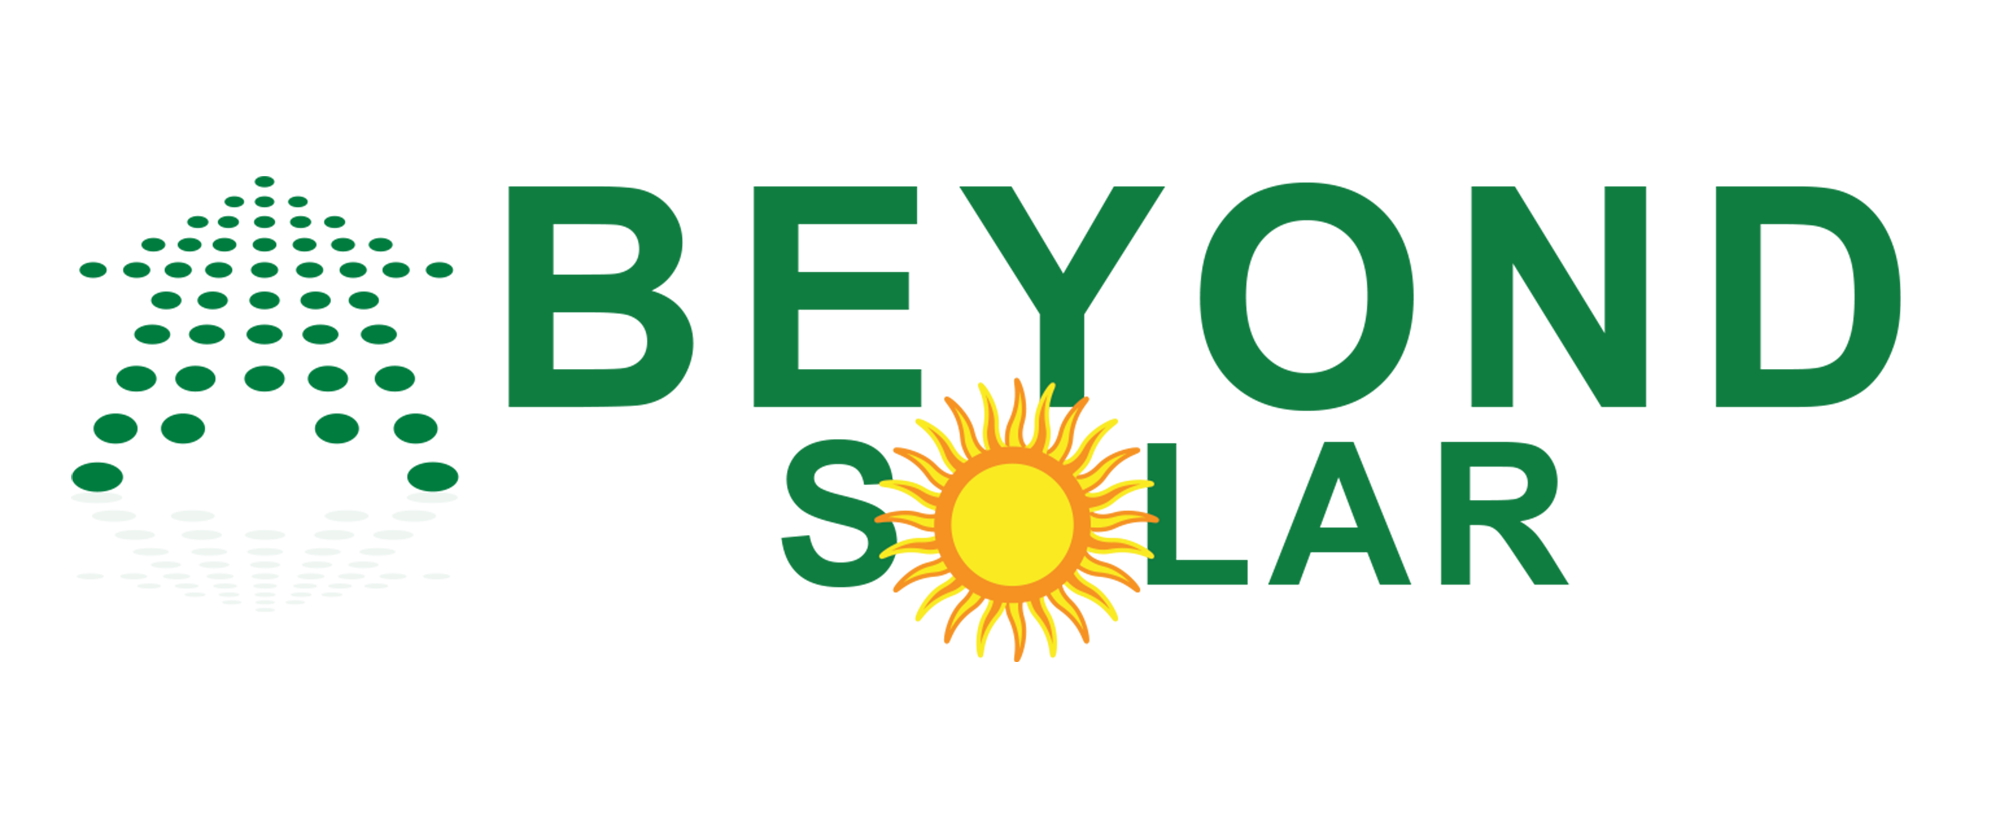 View all of our Beyond Solar products.